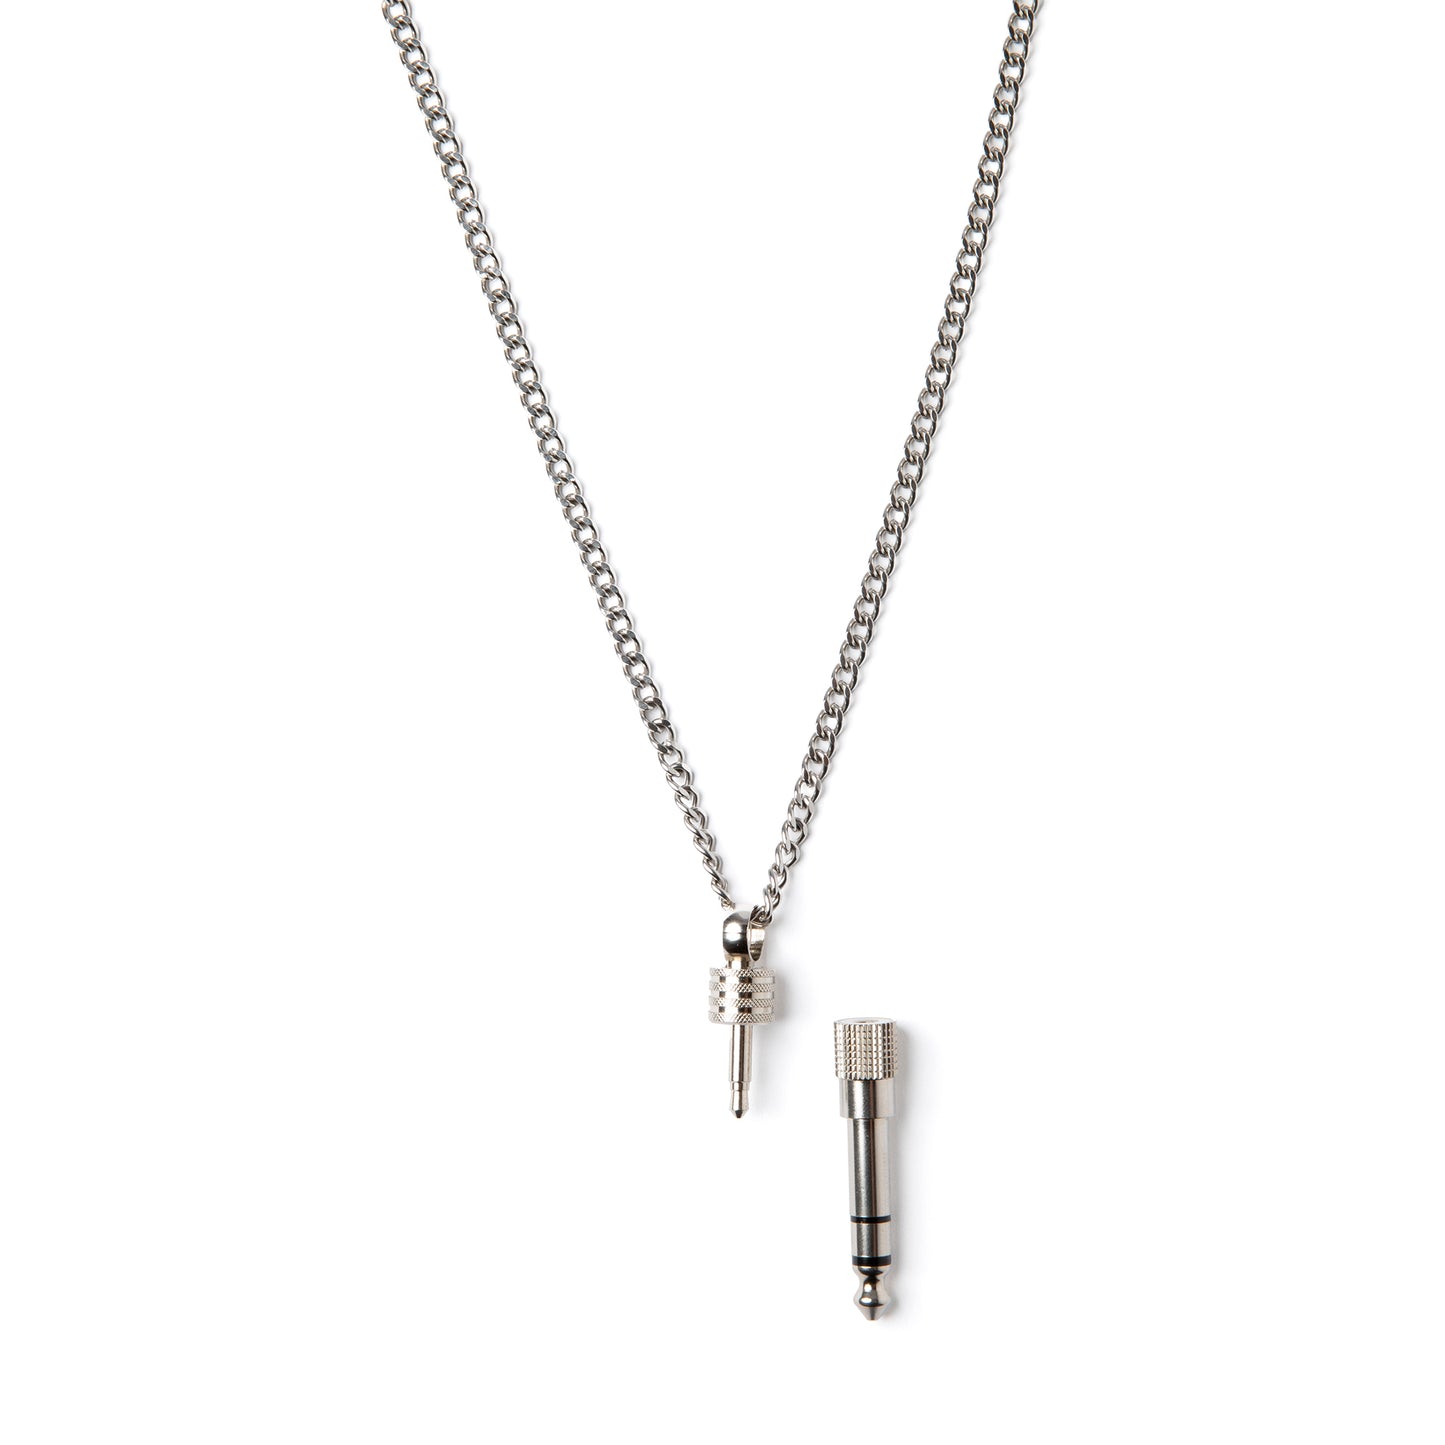 DJ Necklace with Functional 1/4" AUX Adapter